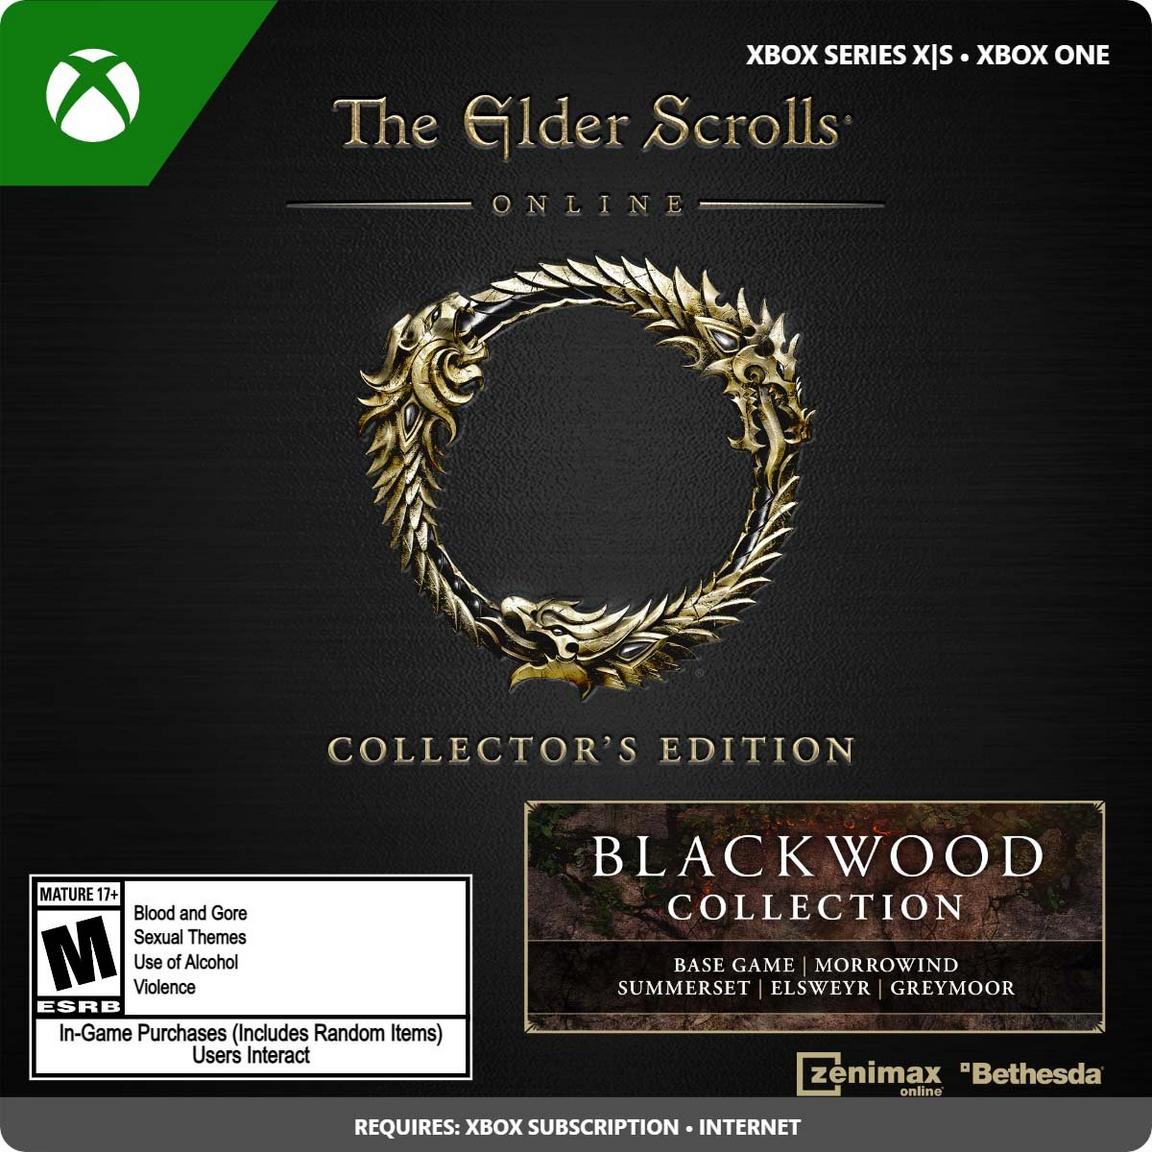 The Elder Scrolls Online Collection: Blackwood Collector's Edition - Xbox One -  Bethesda Softworks, G7Q-00153